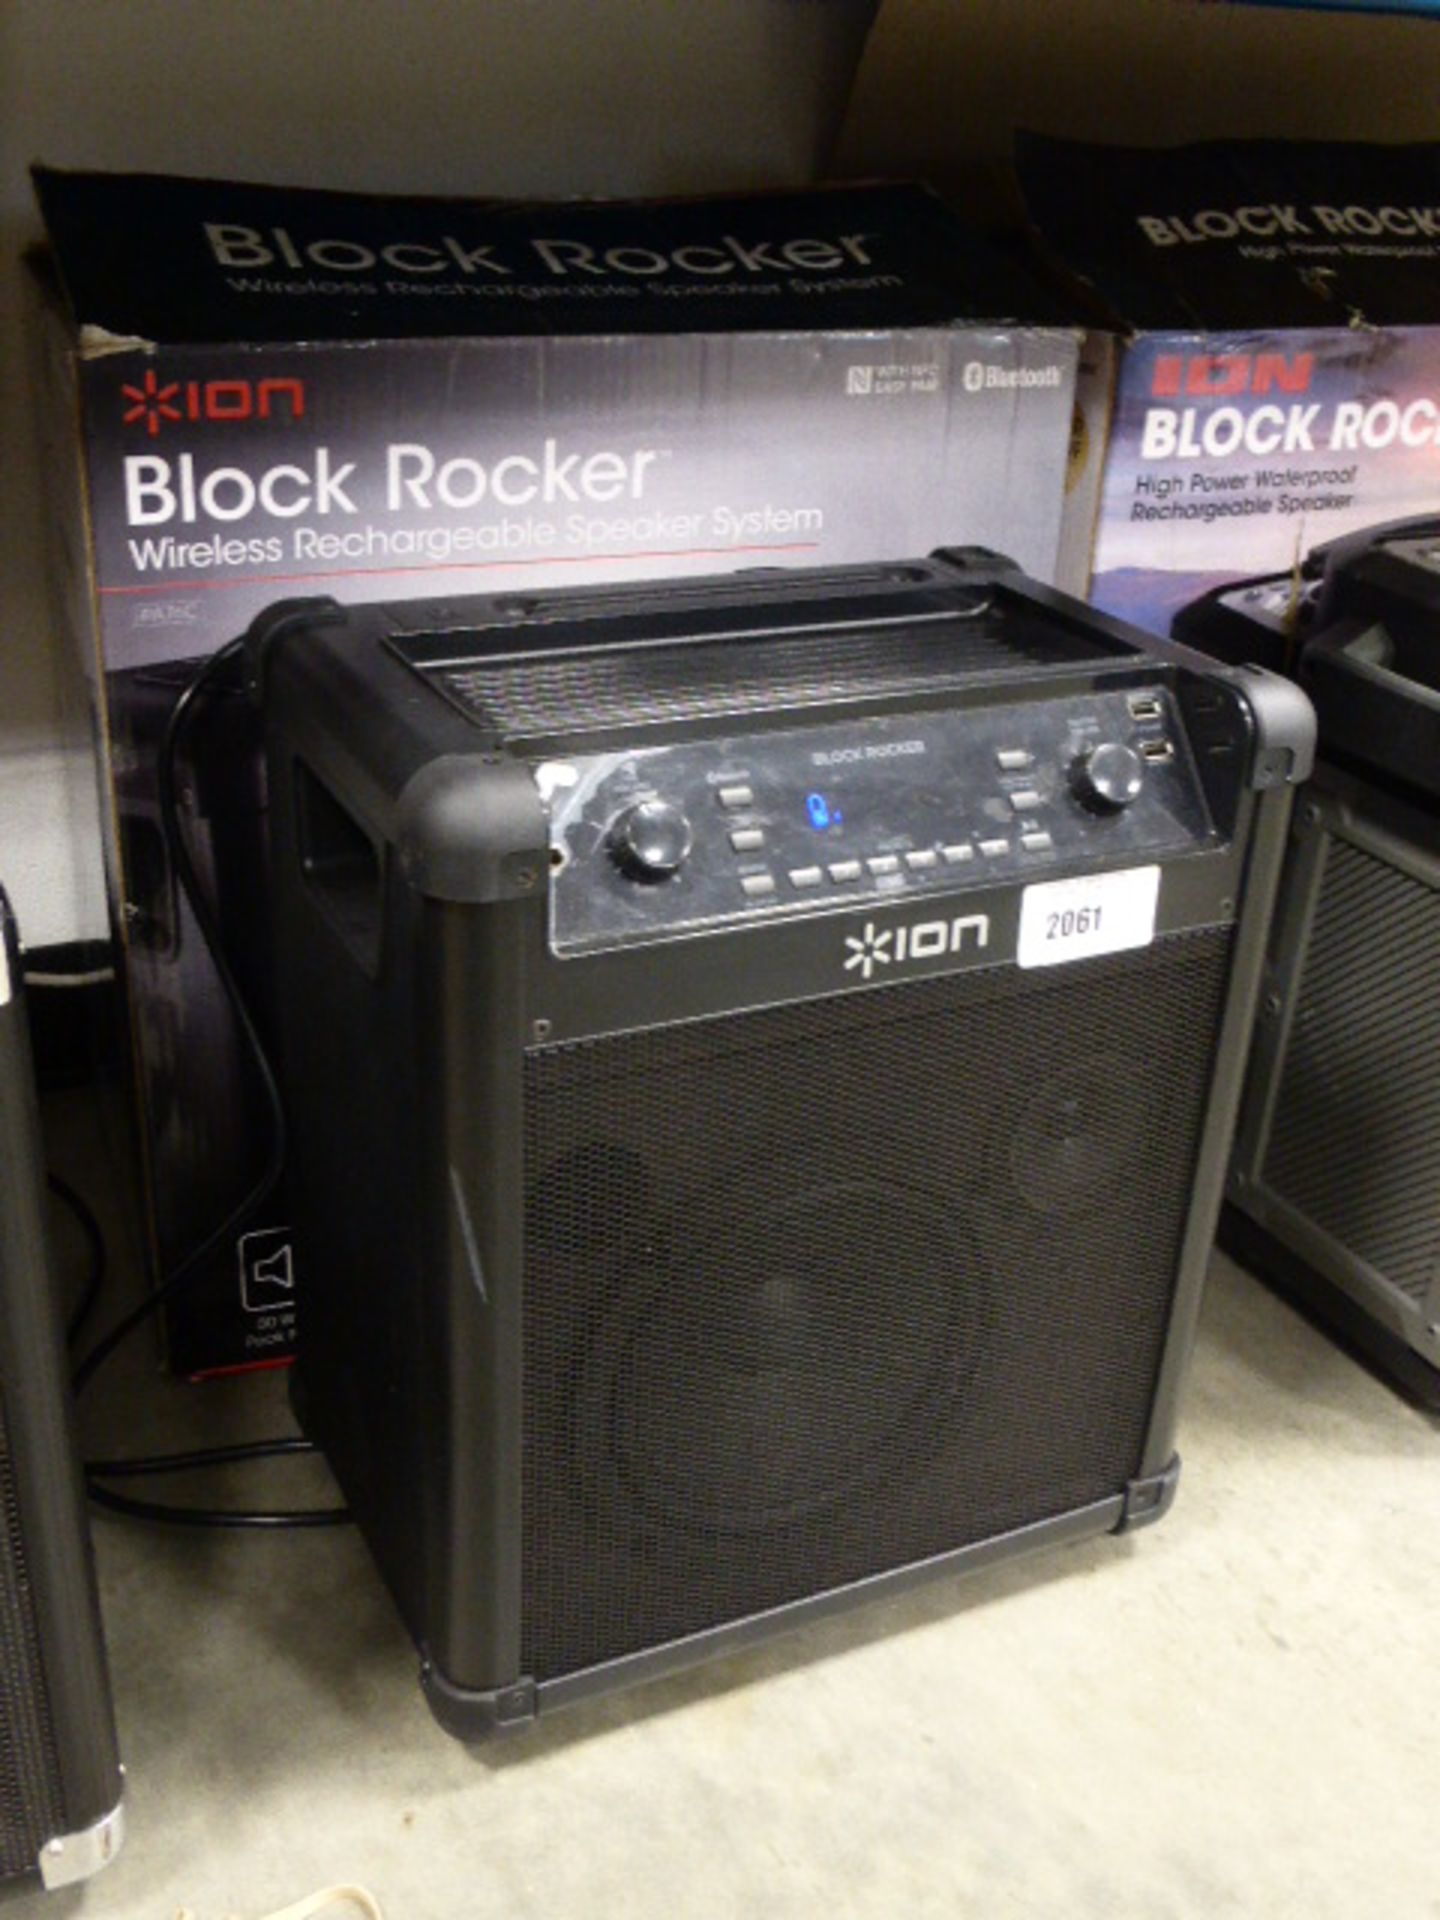 Ion Block Rocker wireless rechargeable speaker system with box